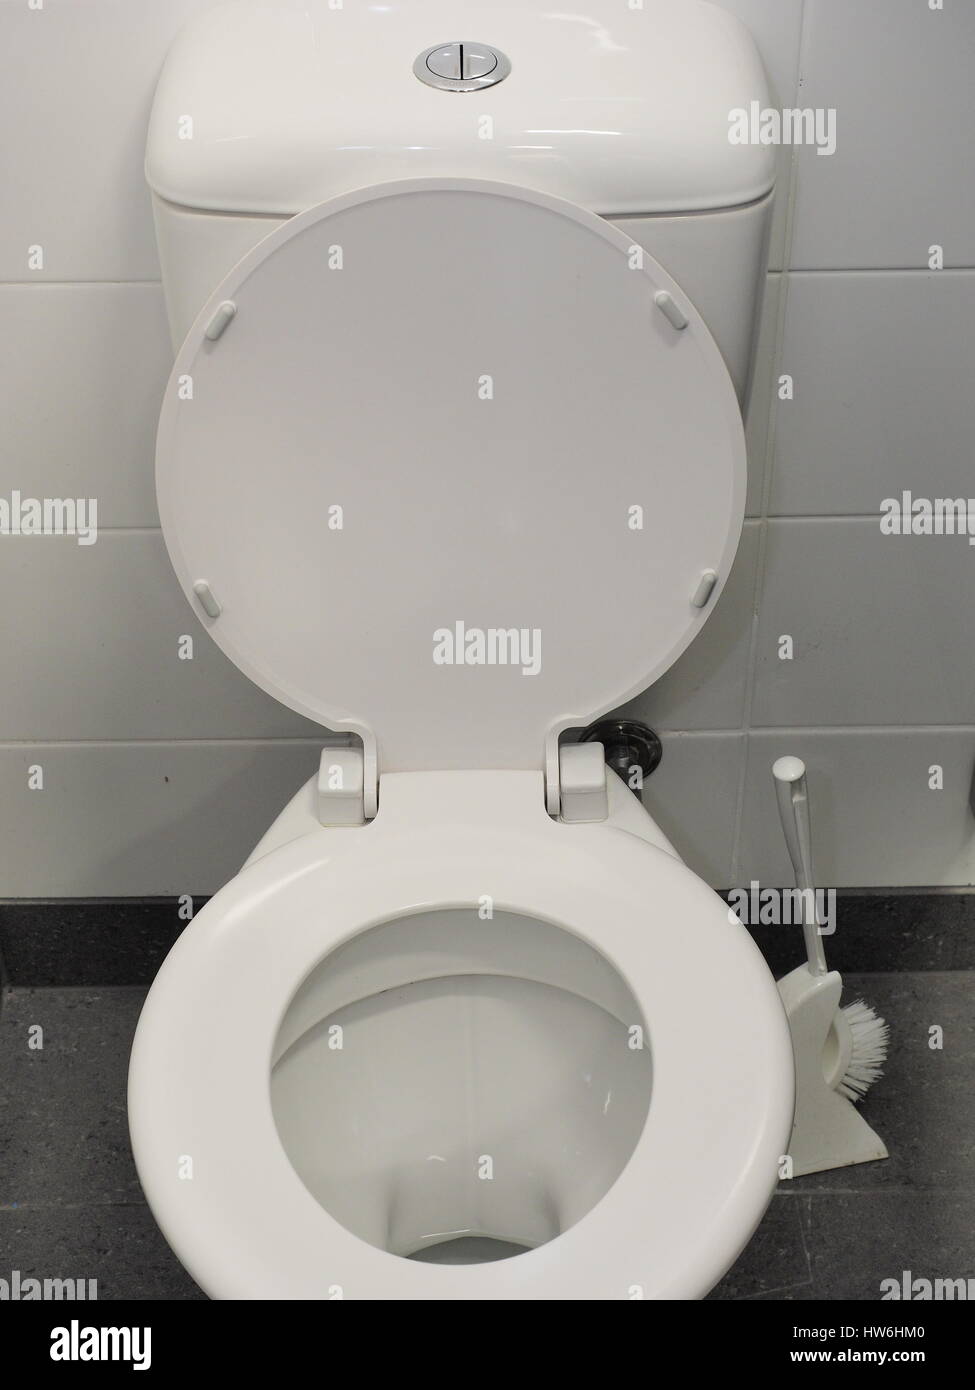 https://c8.alamy.com/comp/HW6HM0/toilet-bowl-with-brush-in-a-cubicle-in-a-pristine-industrial-lavatory-HW6HM0.jpg